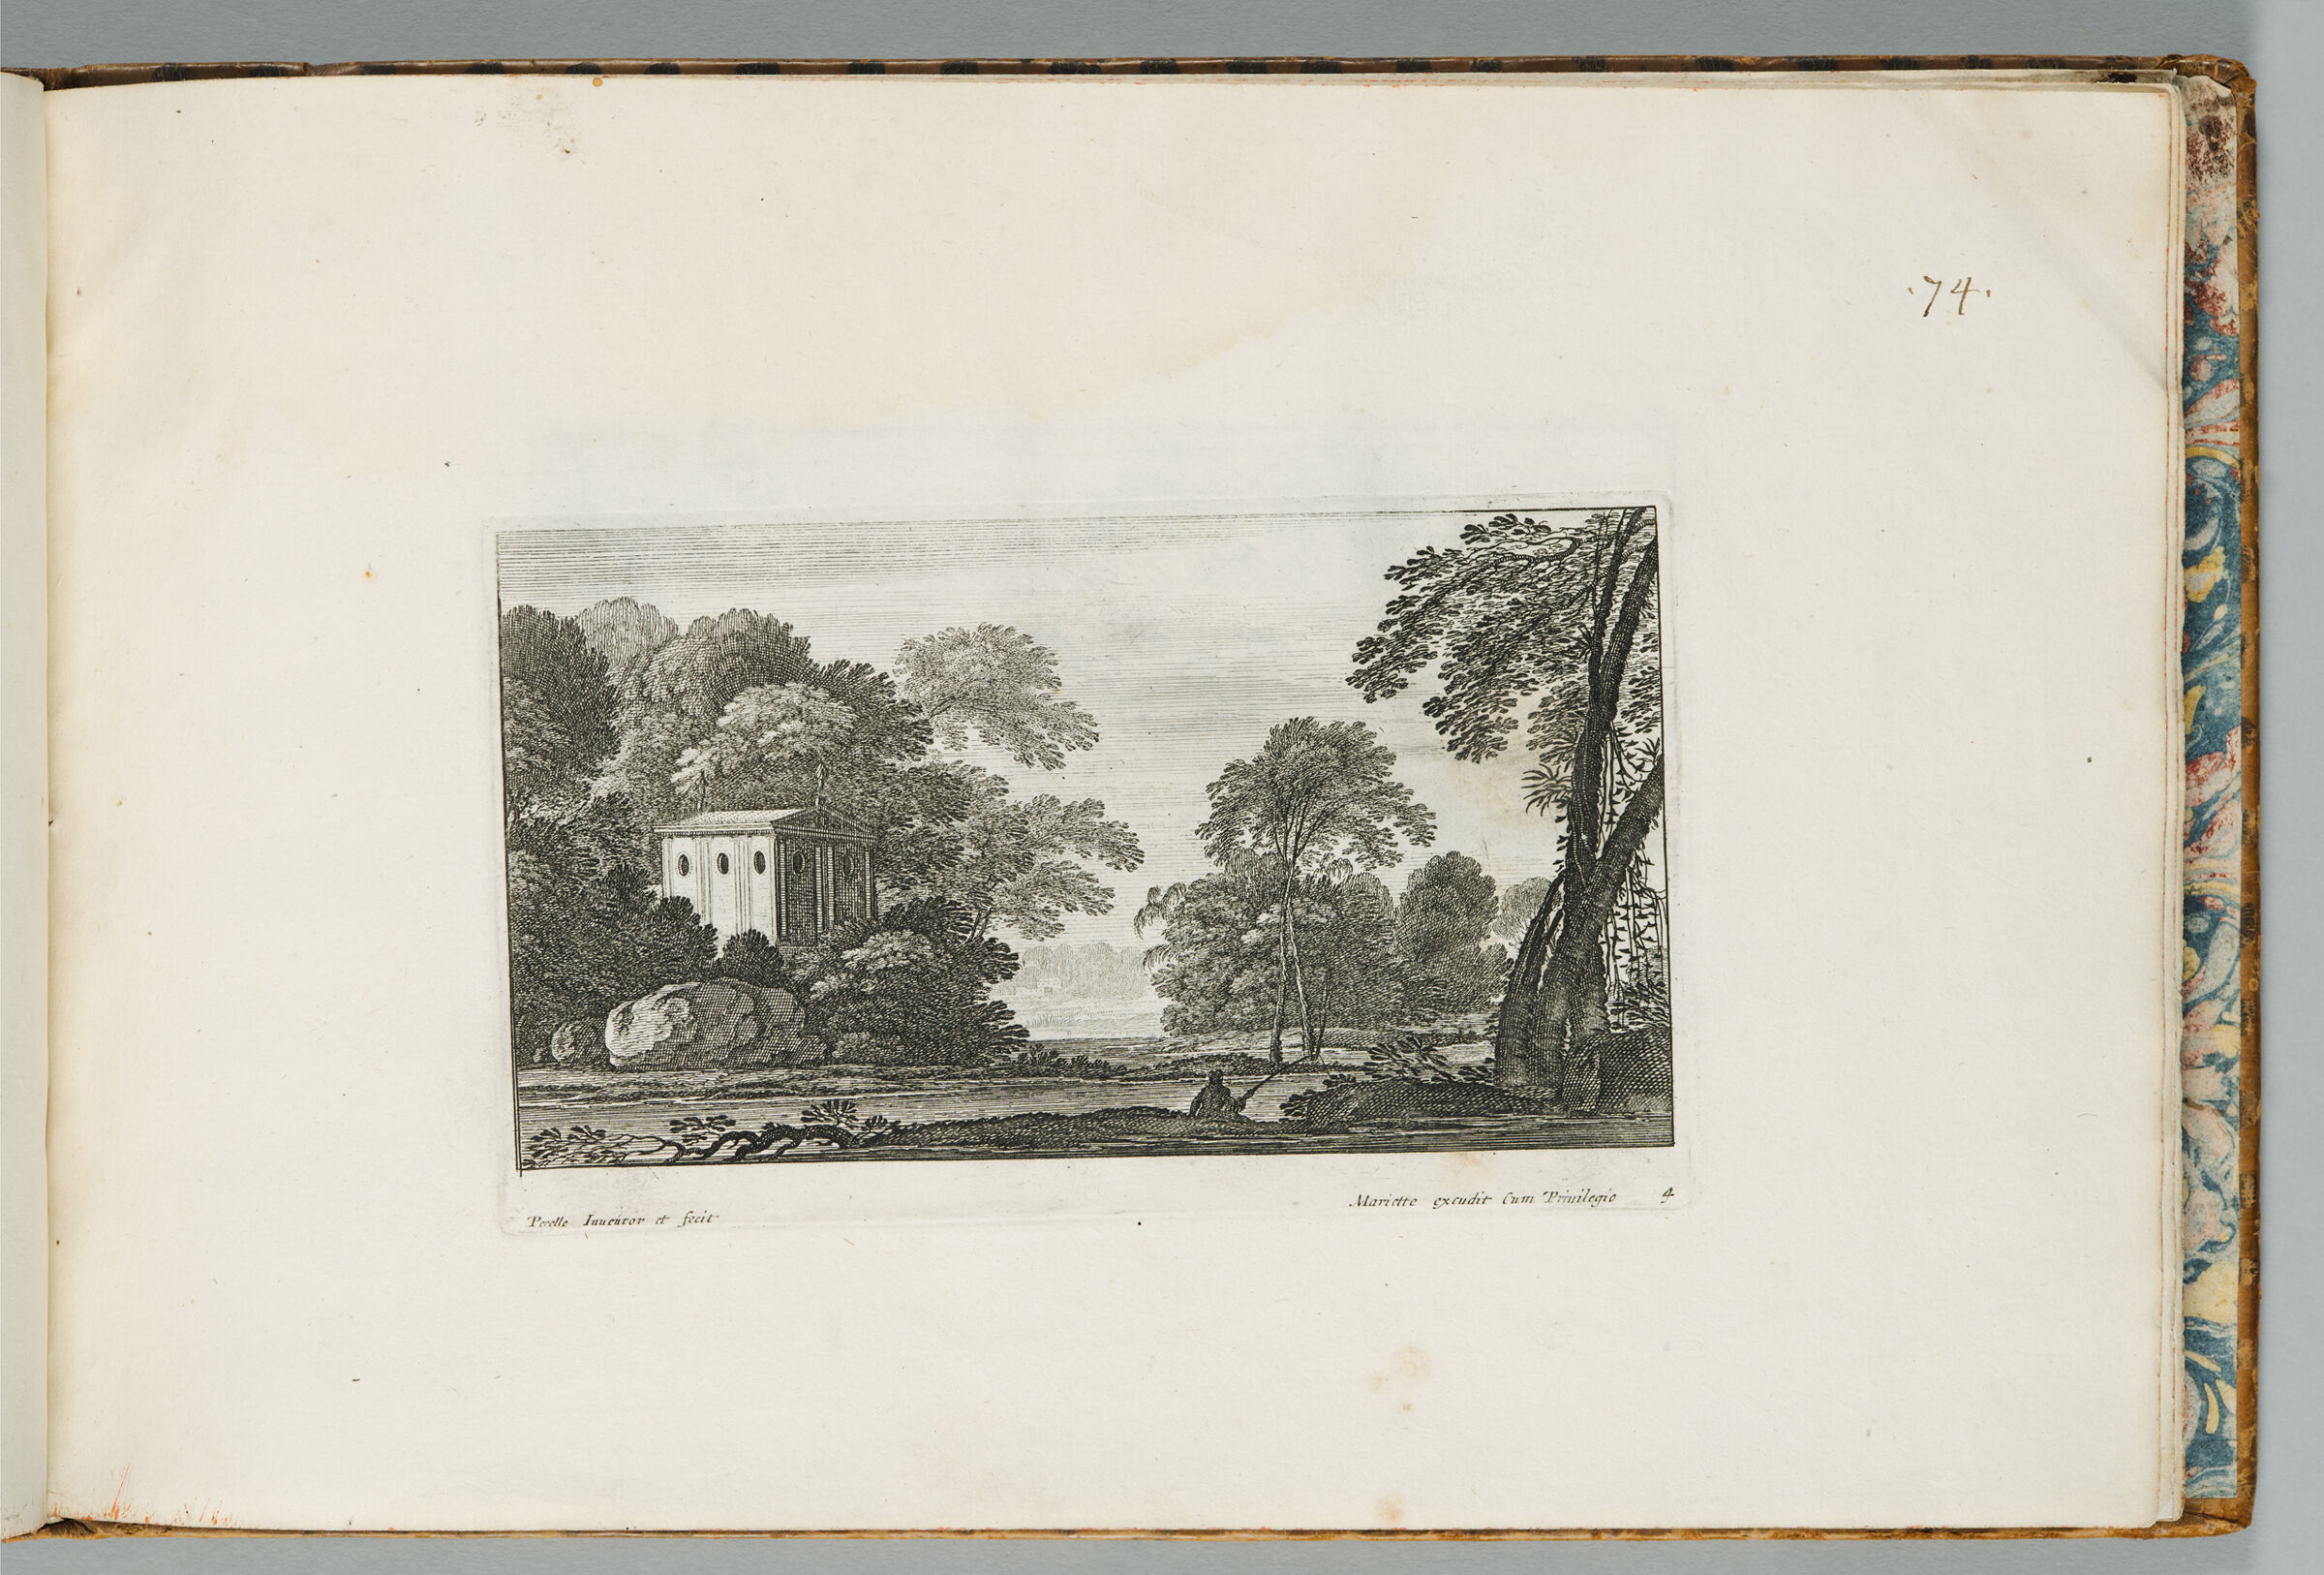 Landscape With A Temple At Left, An Angler In The Foreground